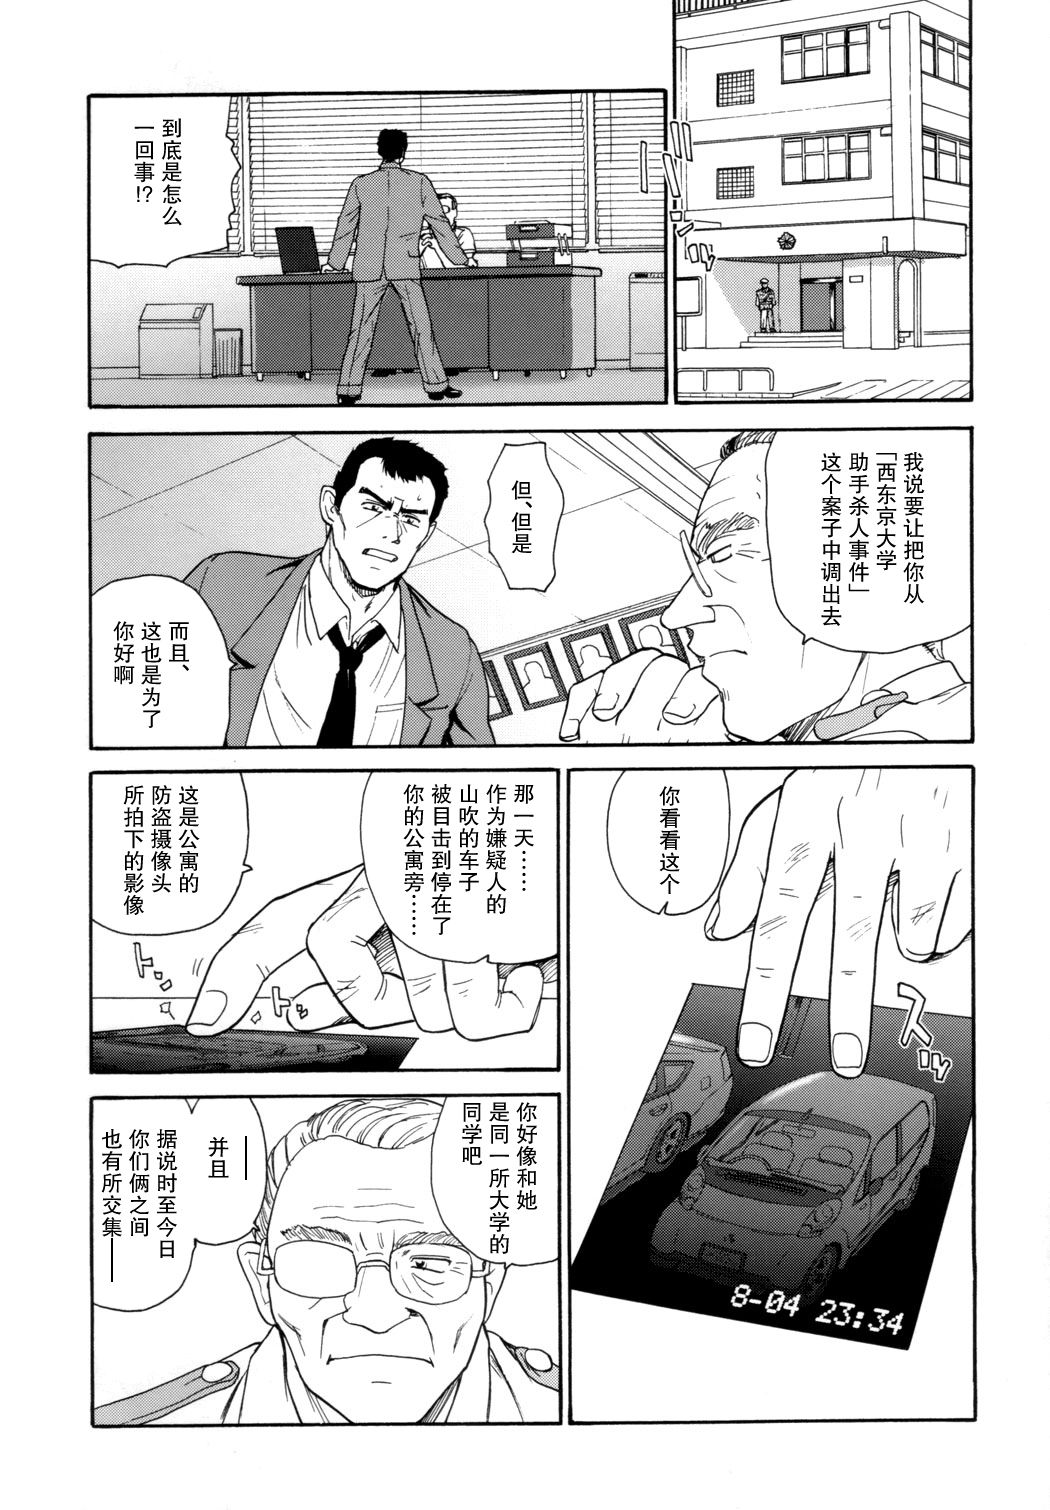 (C72) [Behind Moon (Q)] Dulce Report 9 | 达西报告 9 [Chinese] [哈尼喵汉化组] [Decensored] page 32 full